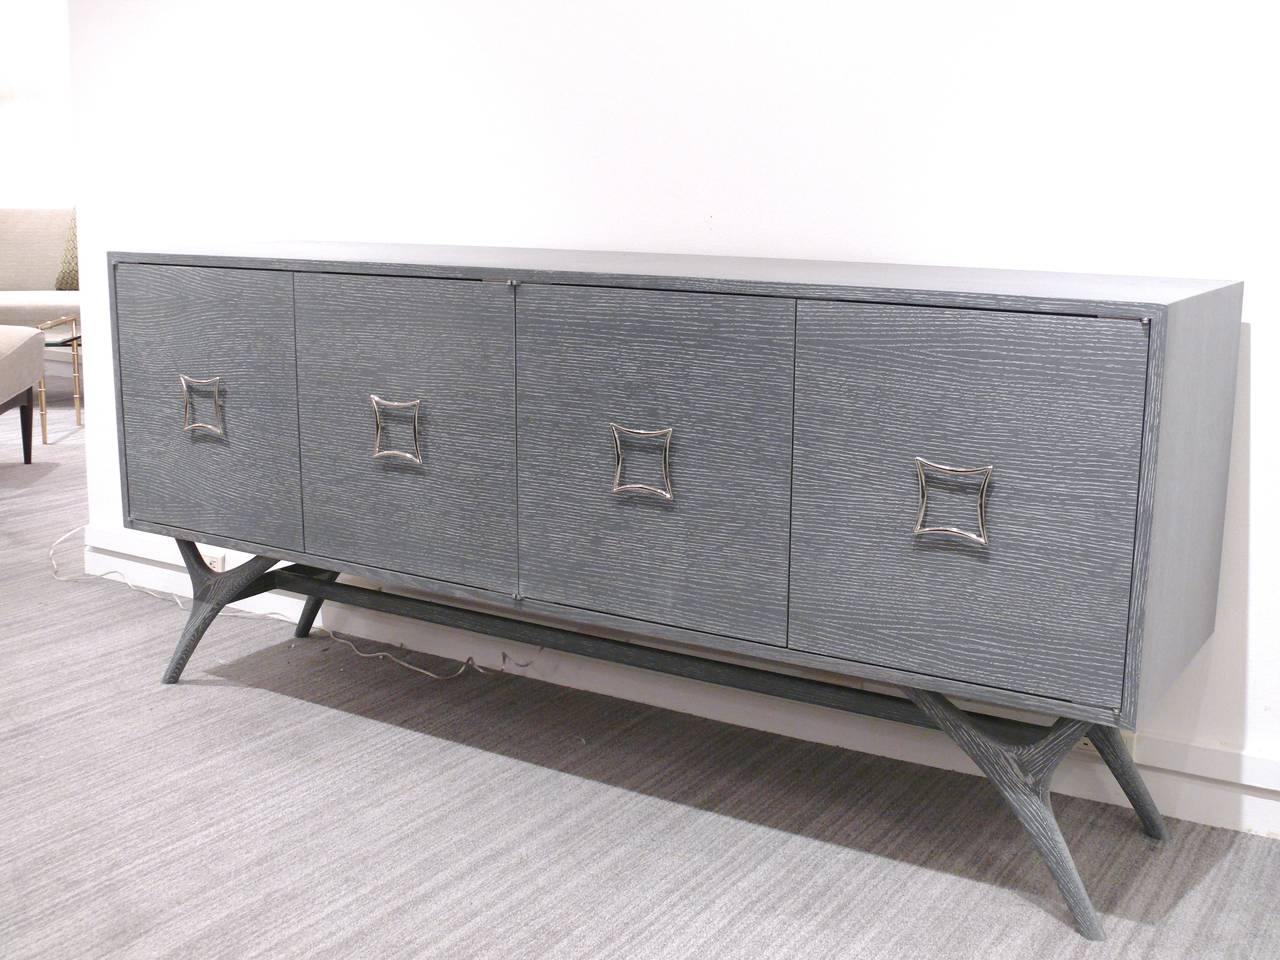 Exceptional four-door credenza by Irwin Feld Design for CF Modern. Shown in grey cerused oak with polished nickel-plated hardware, we offer custom sizes and finishes. We can customize this piece to your specifications, add drawers and change the